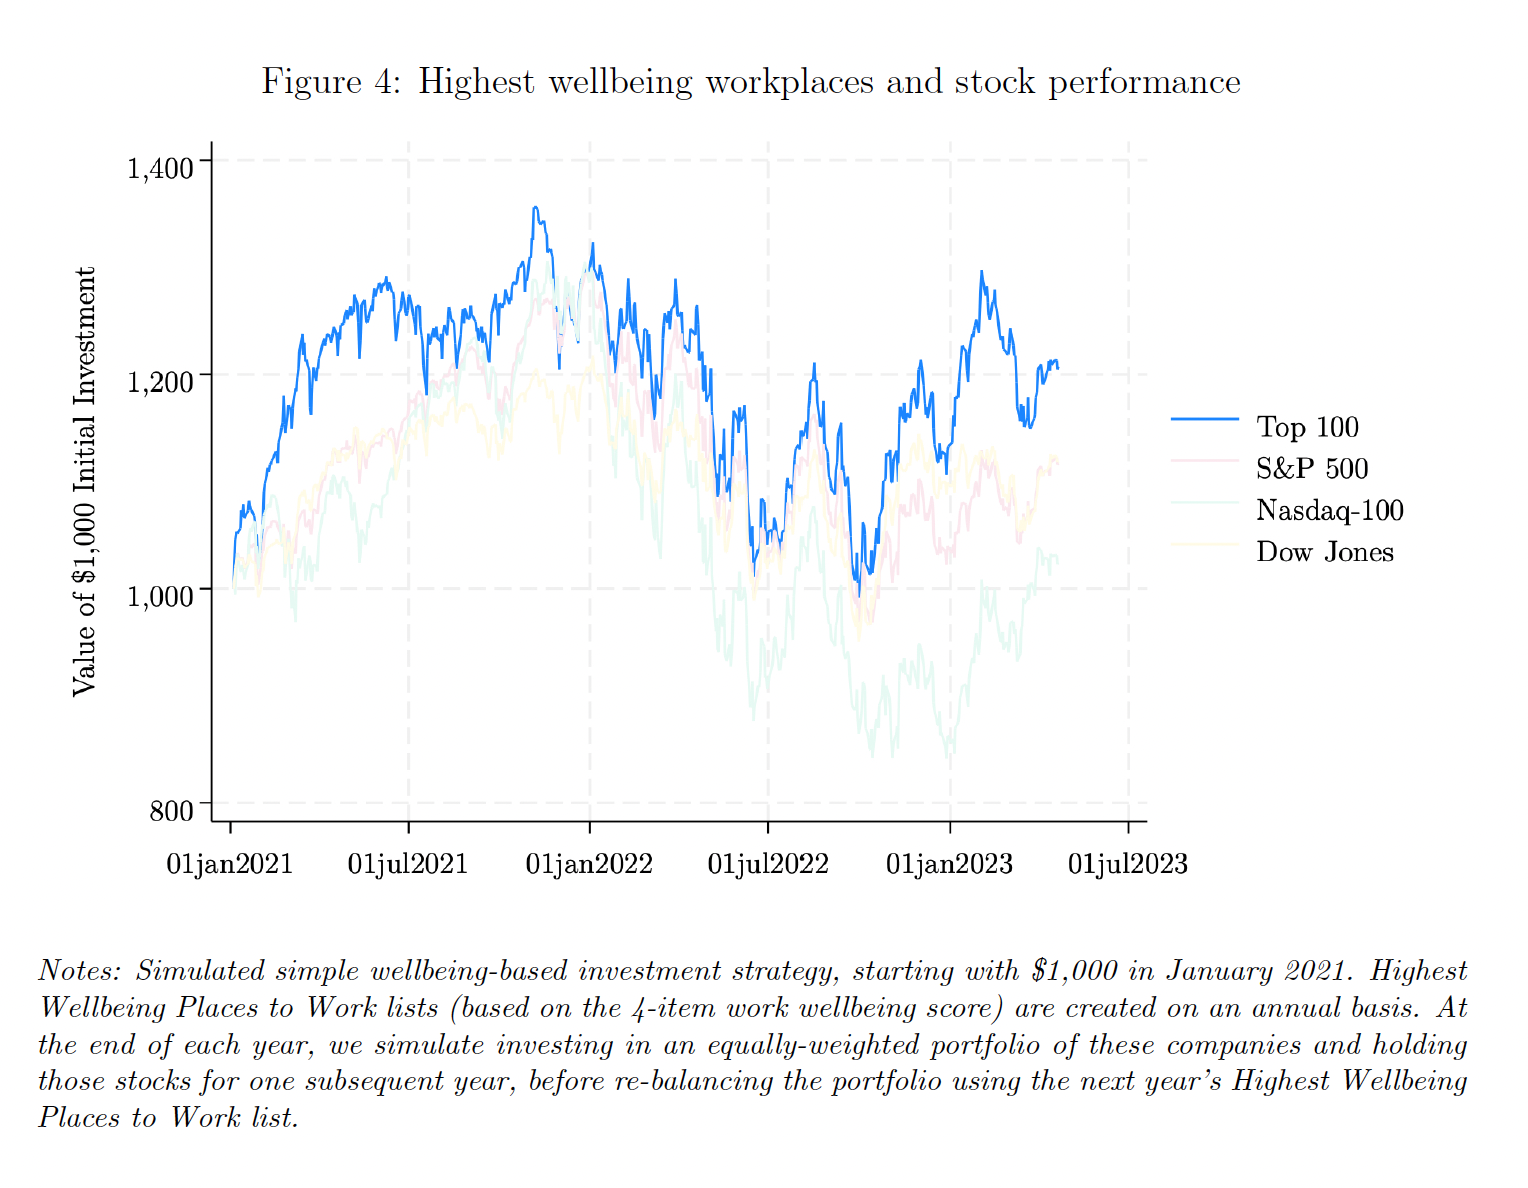 Figure 4 - Workplace wellbeing and firm performance